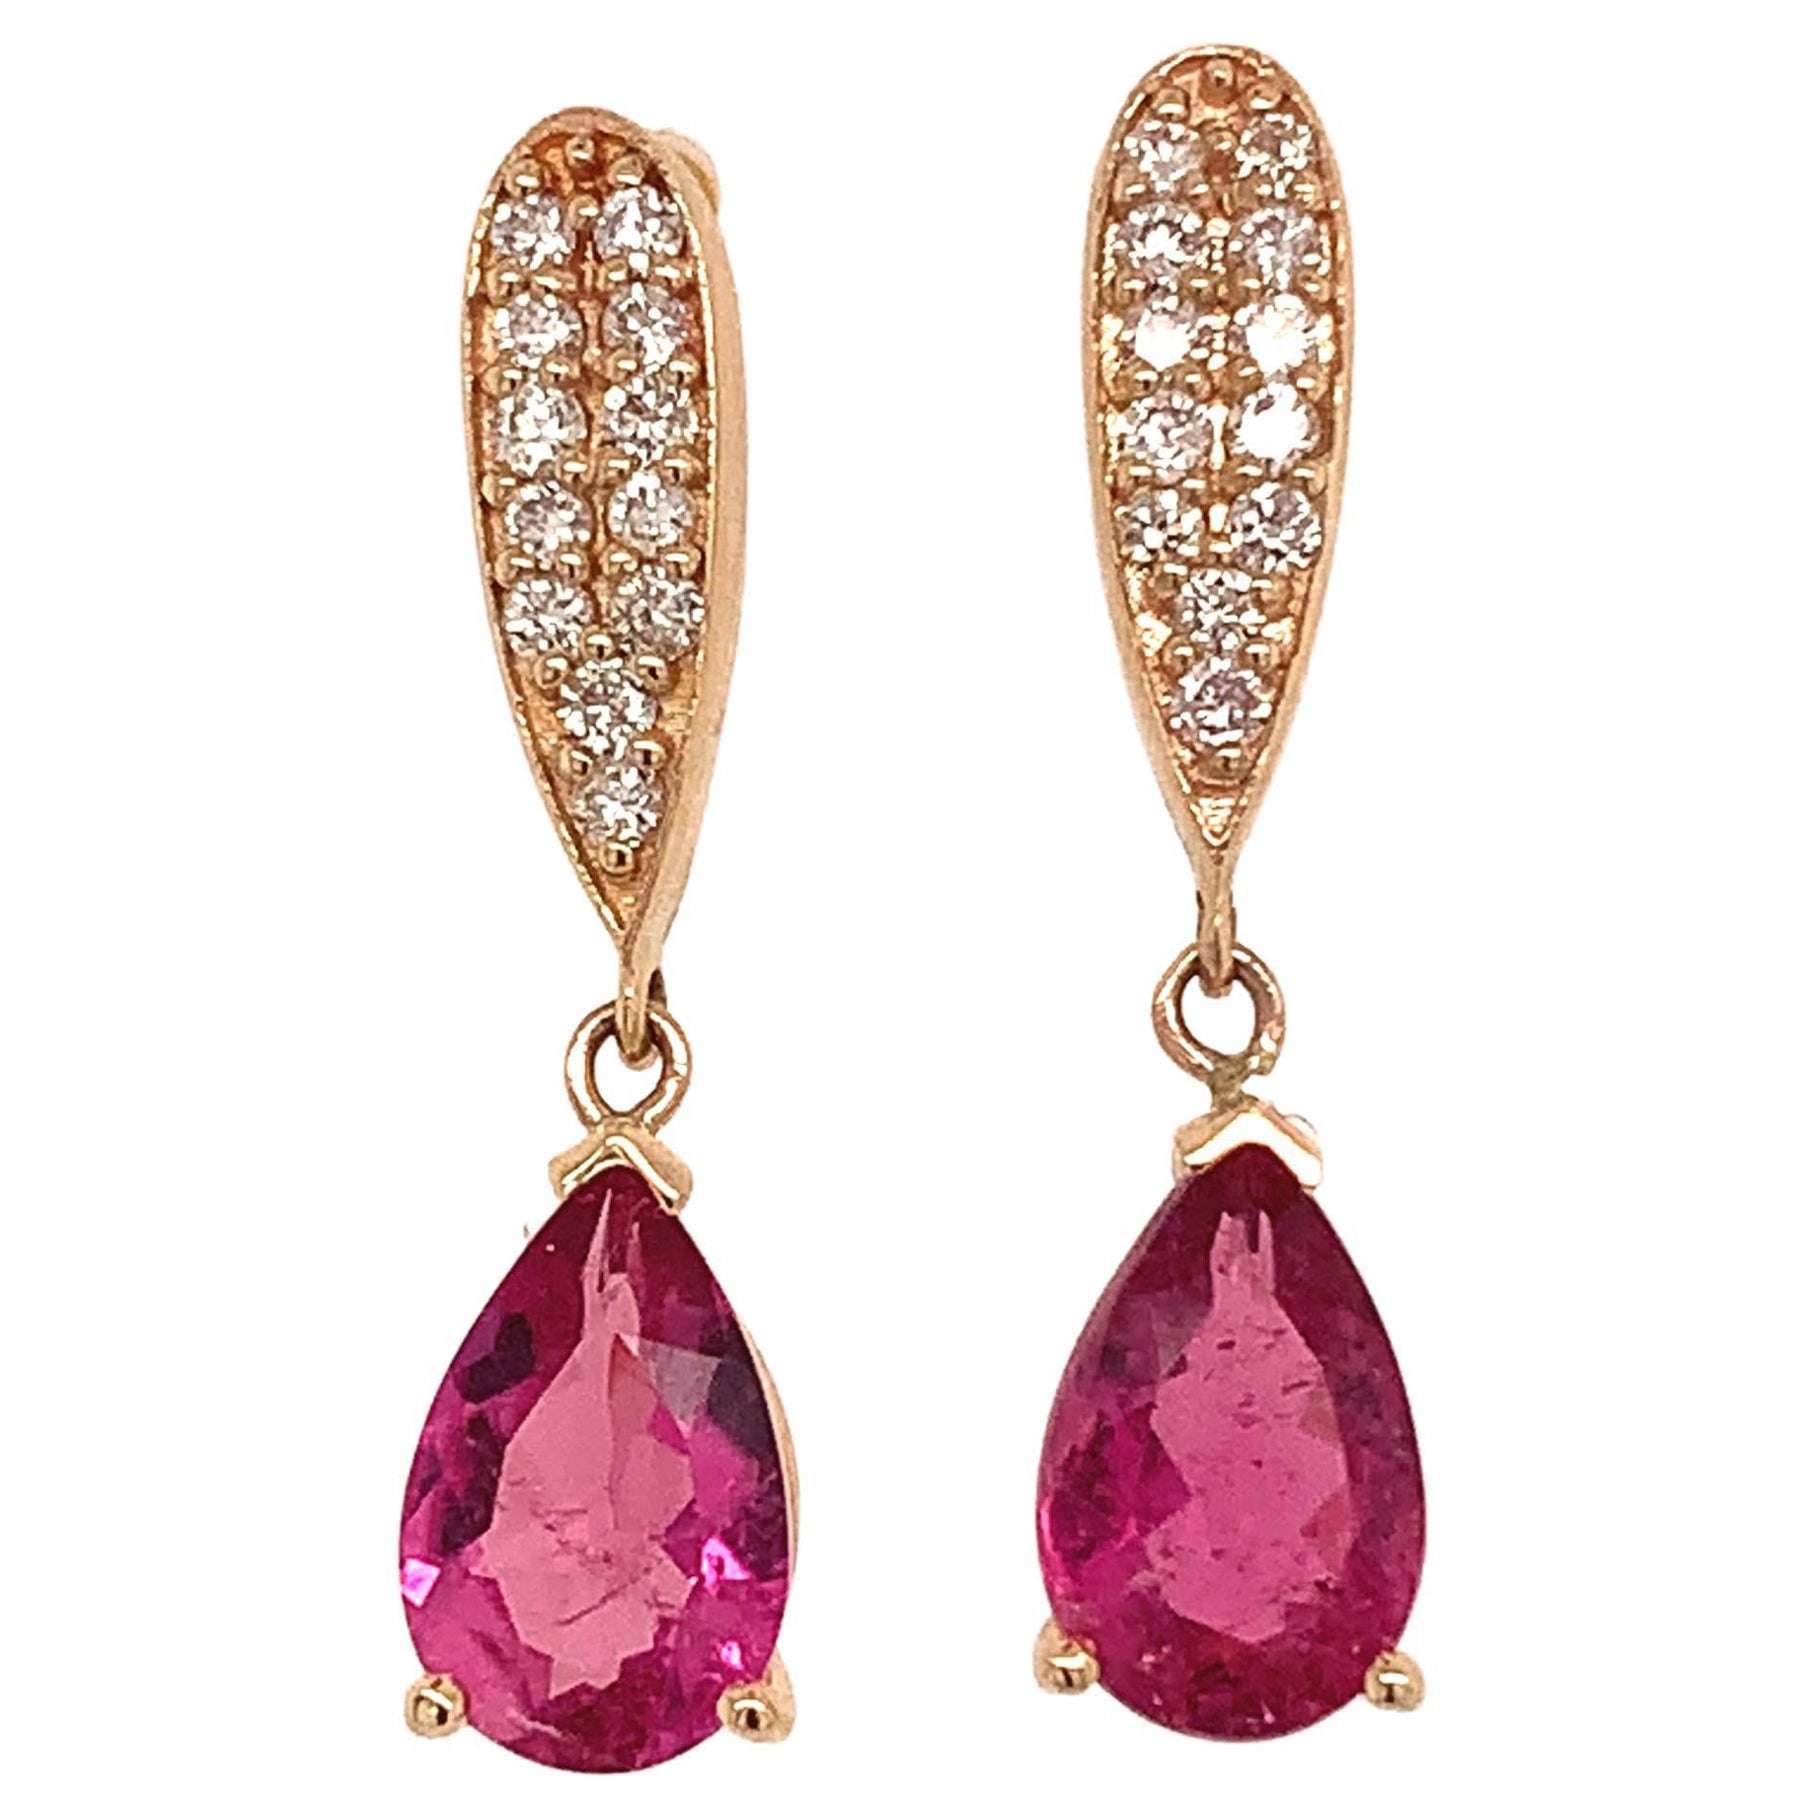 Natural Tourmaline Rubellite Diamond Earrings 14k Gold 1.60 TCW Certified For Sale